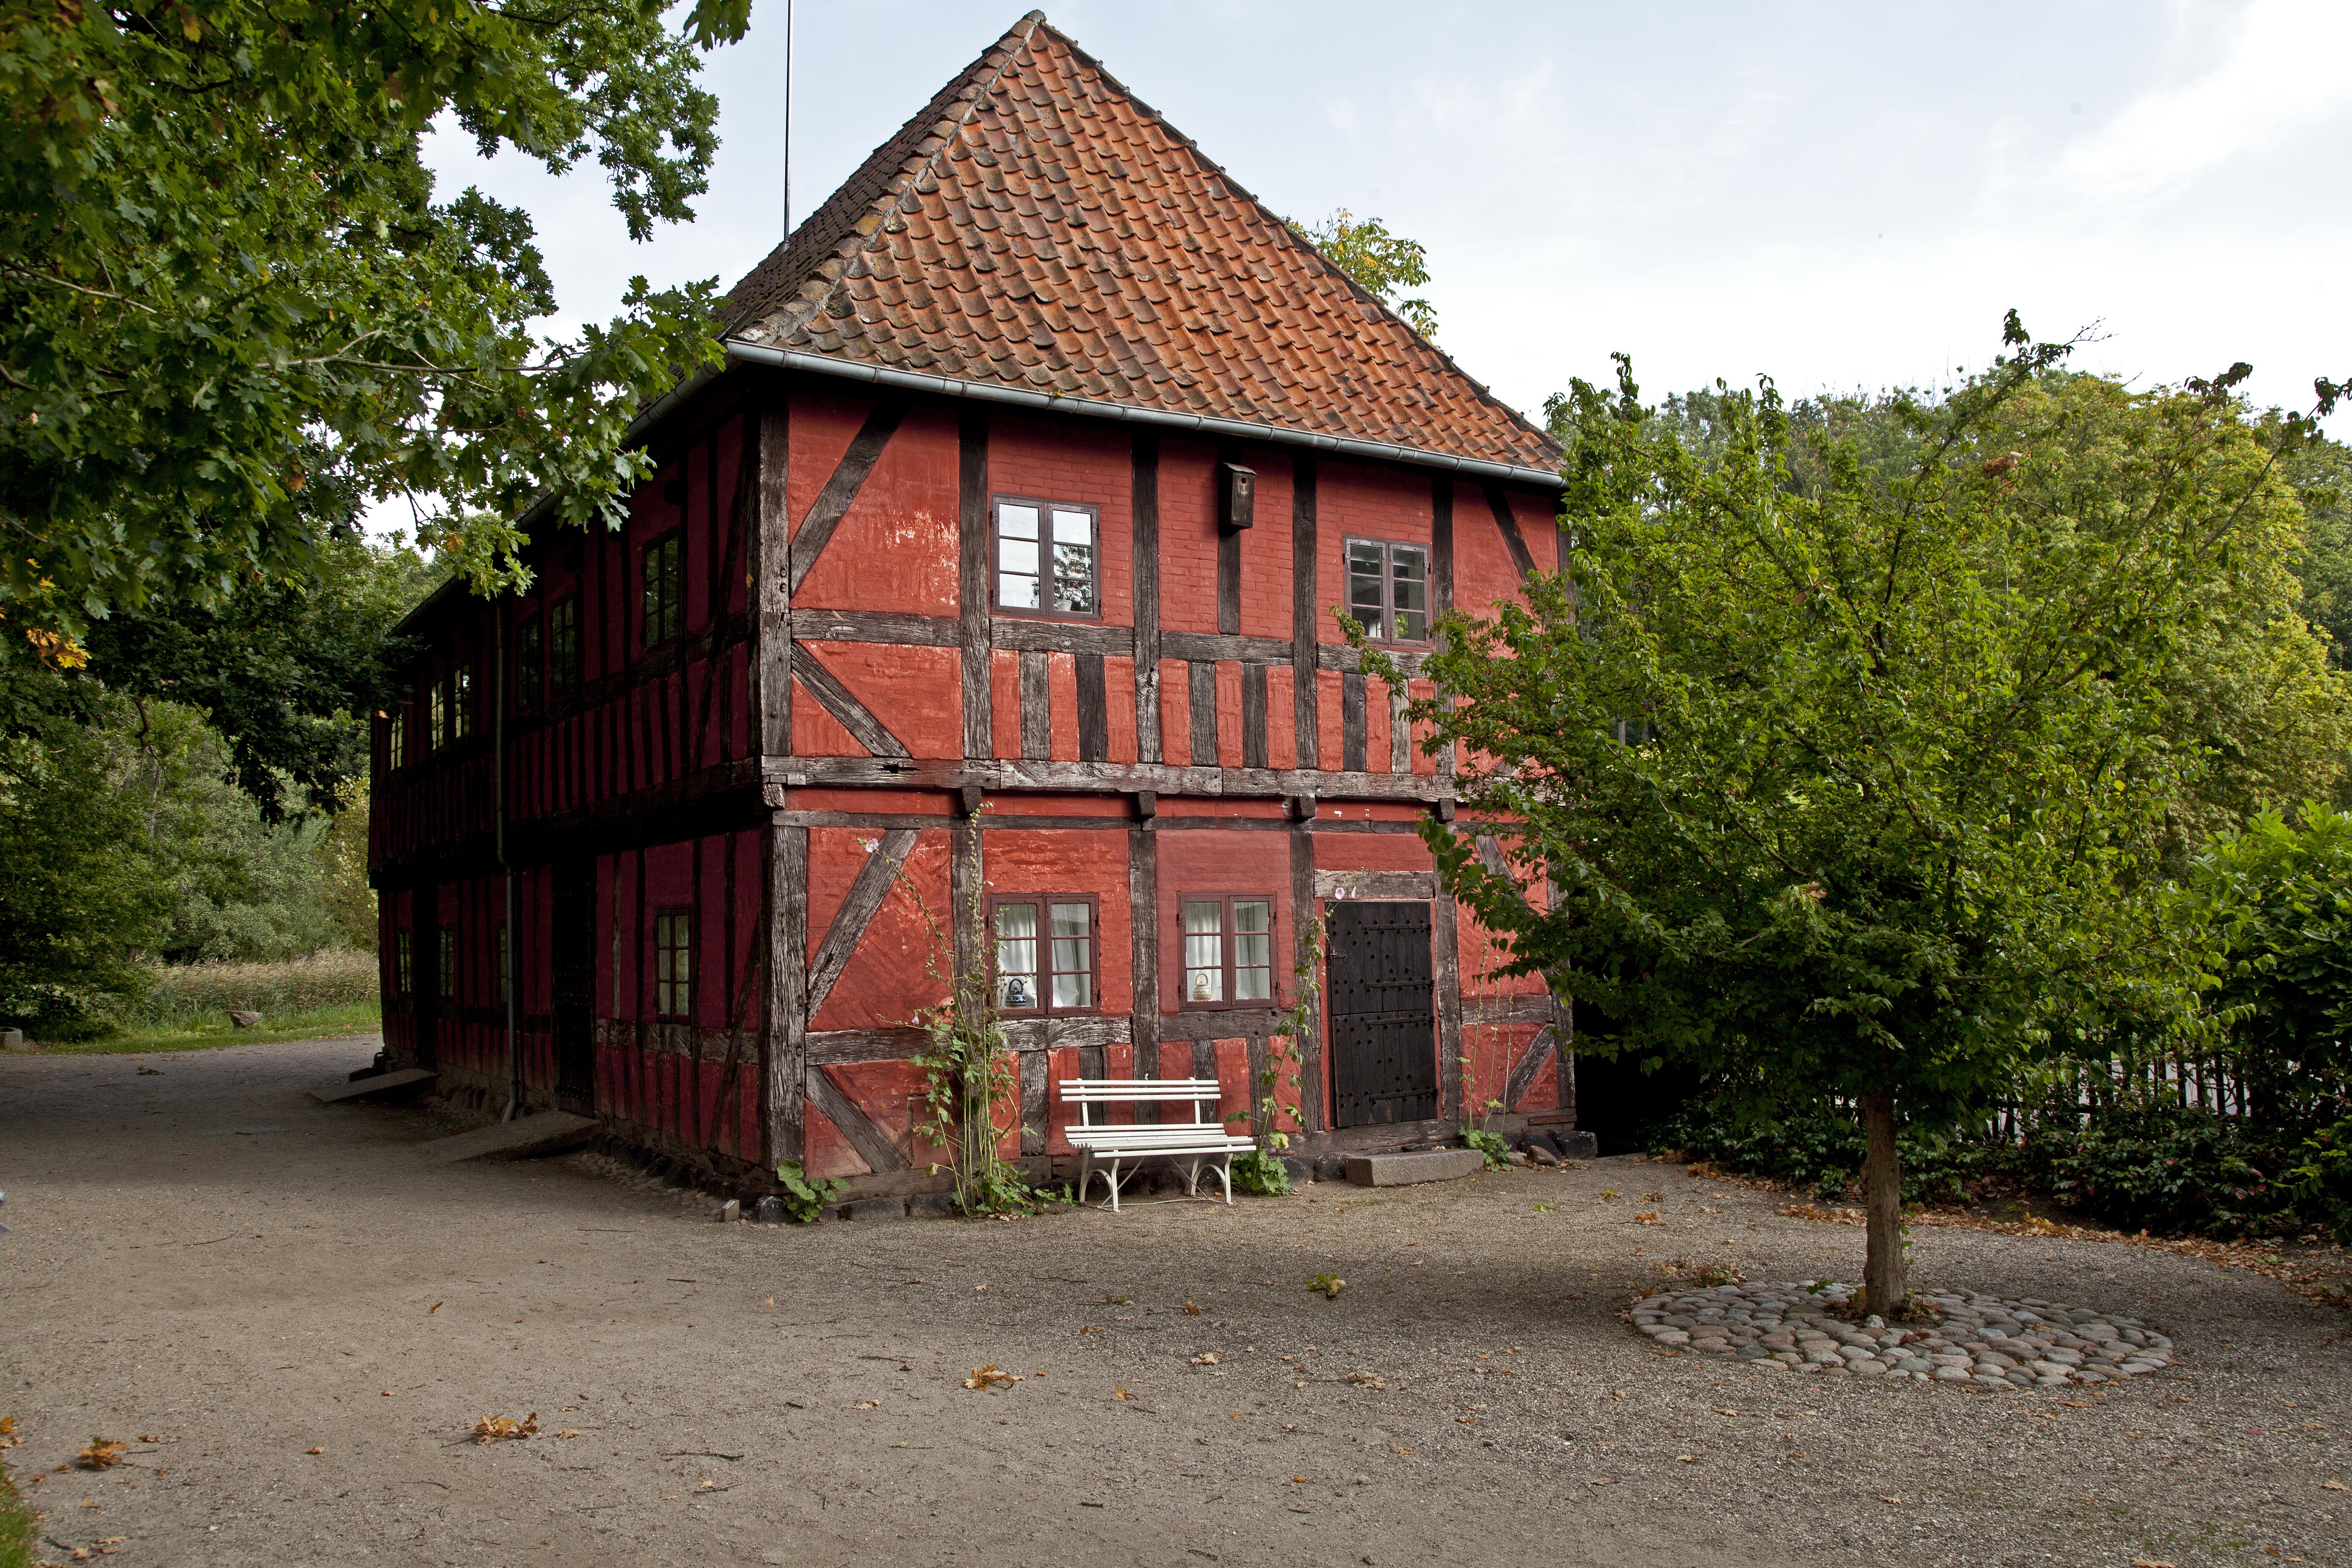 File:Old country house 2.jpg - Wikimedia Commons